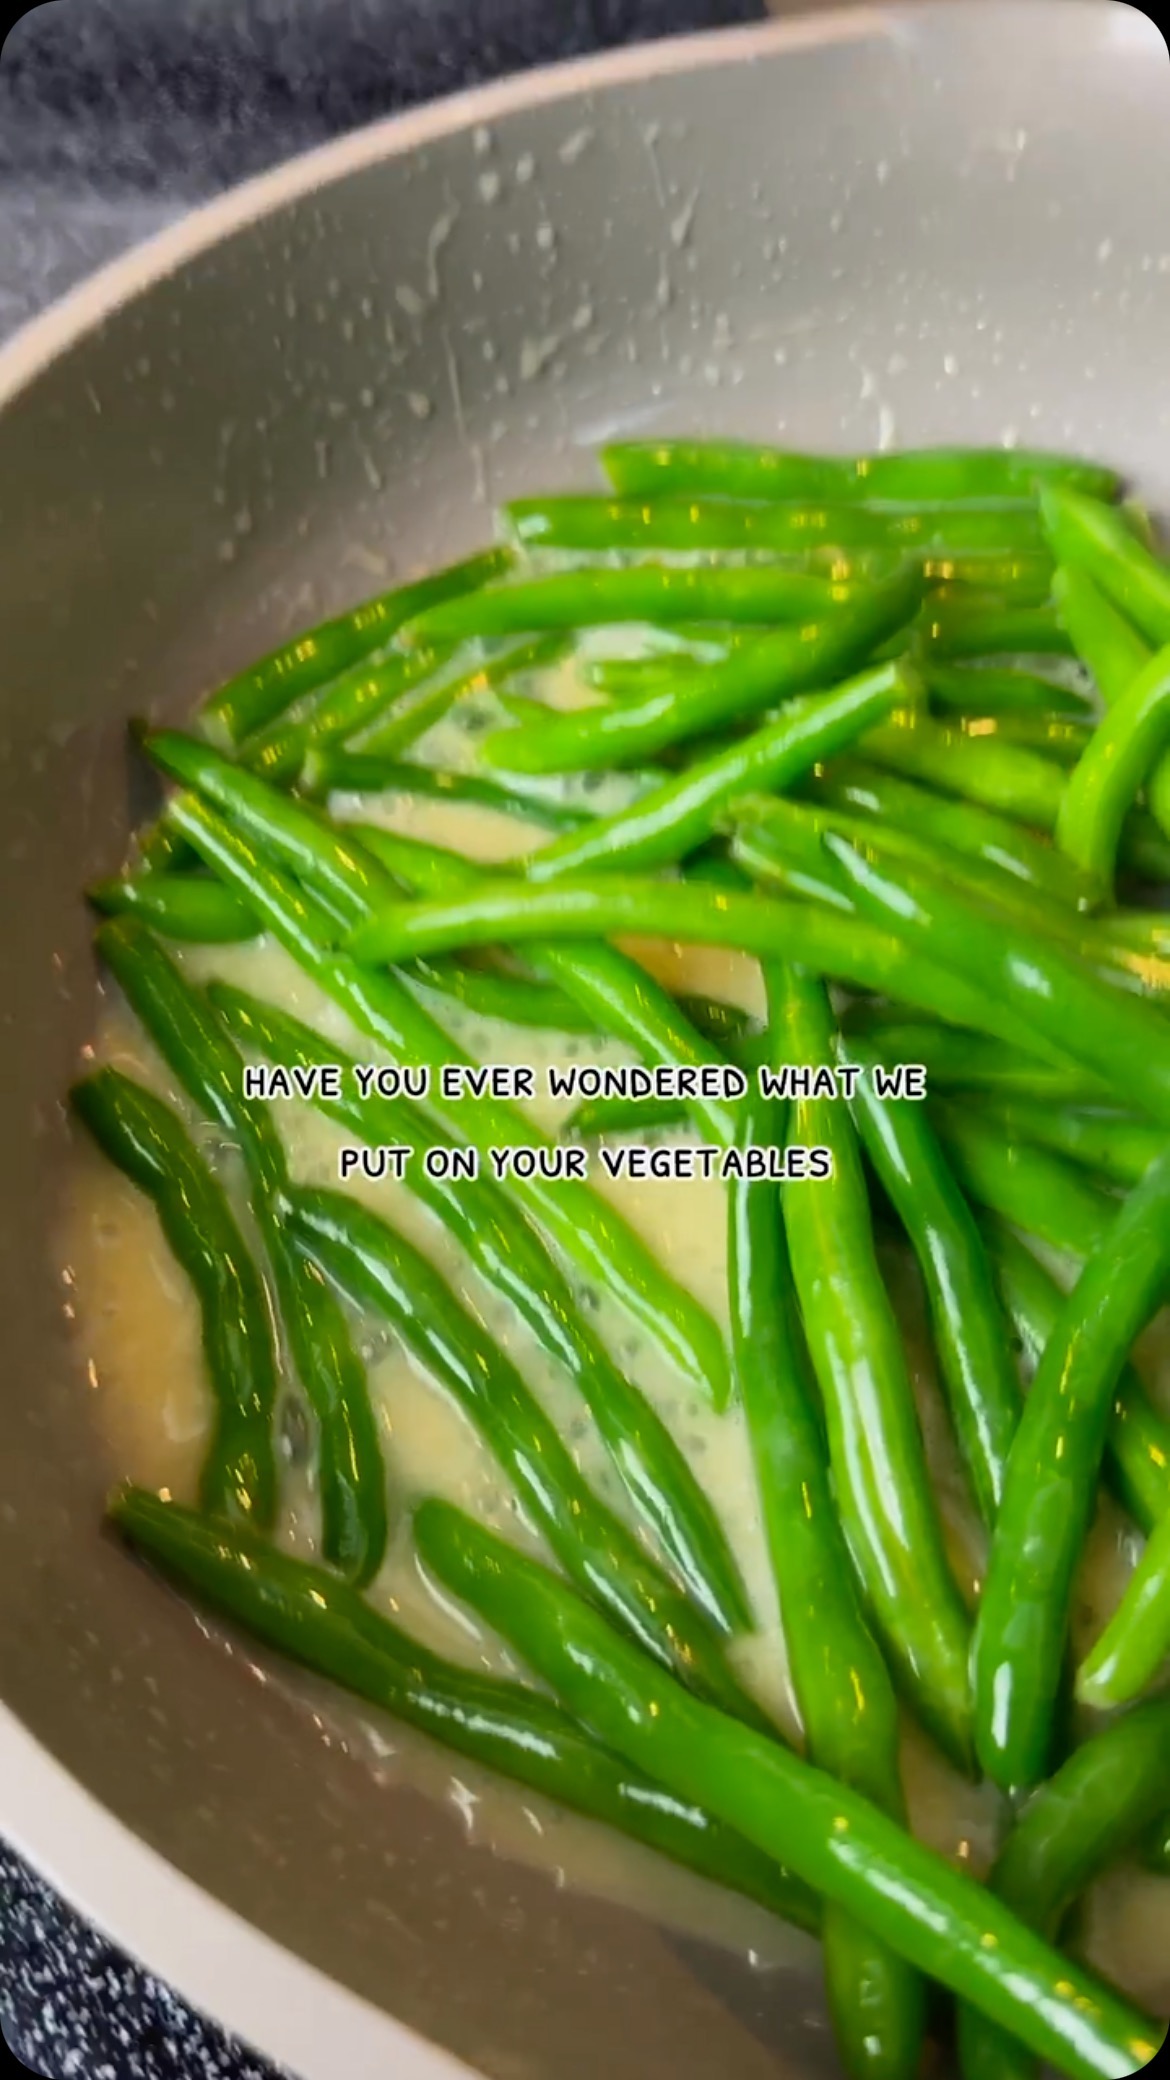 Level up your vegetables  with this fast and simple technique